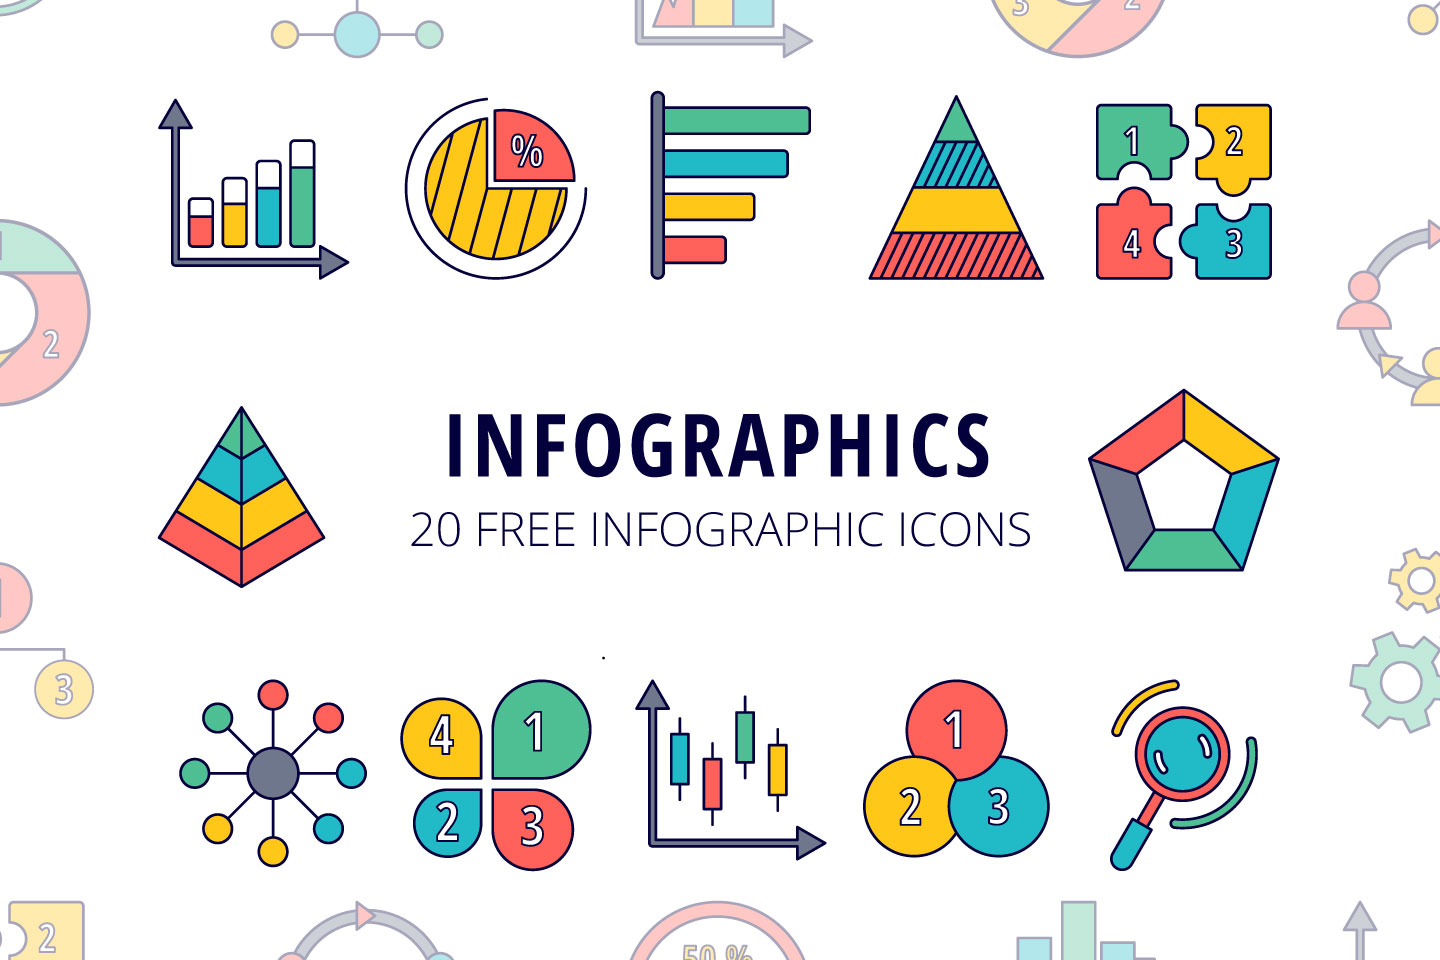 infographic icons of data